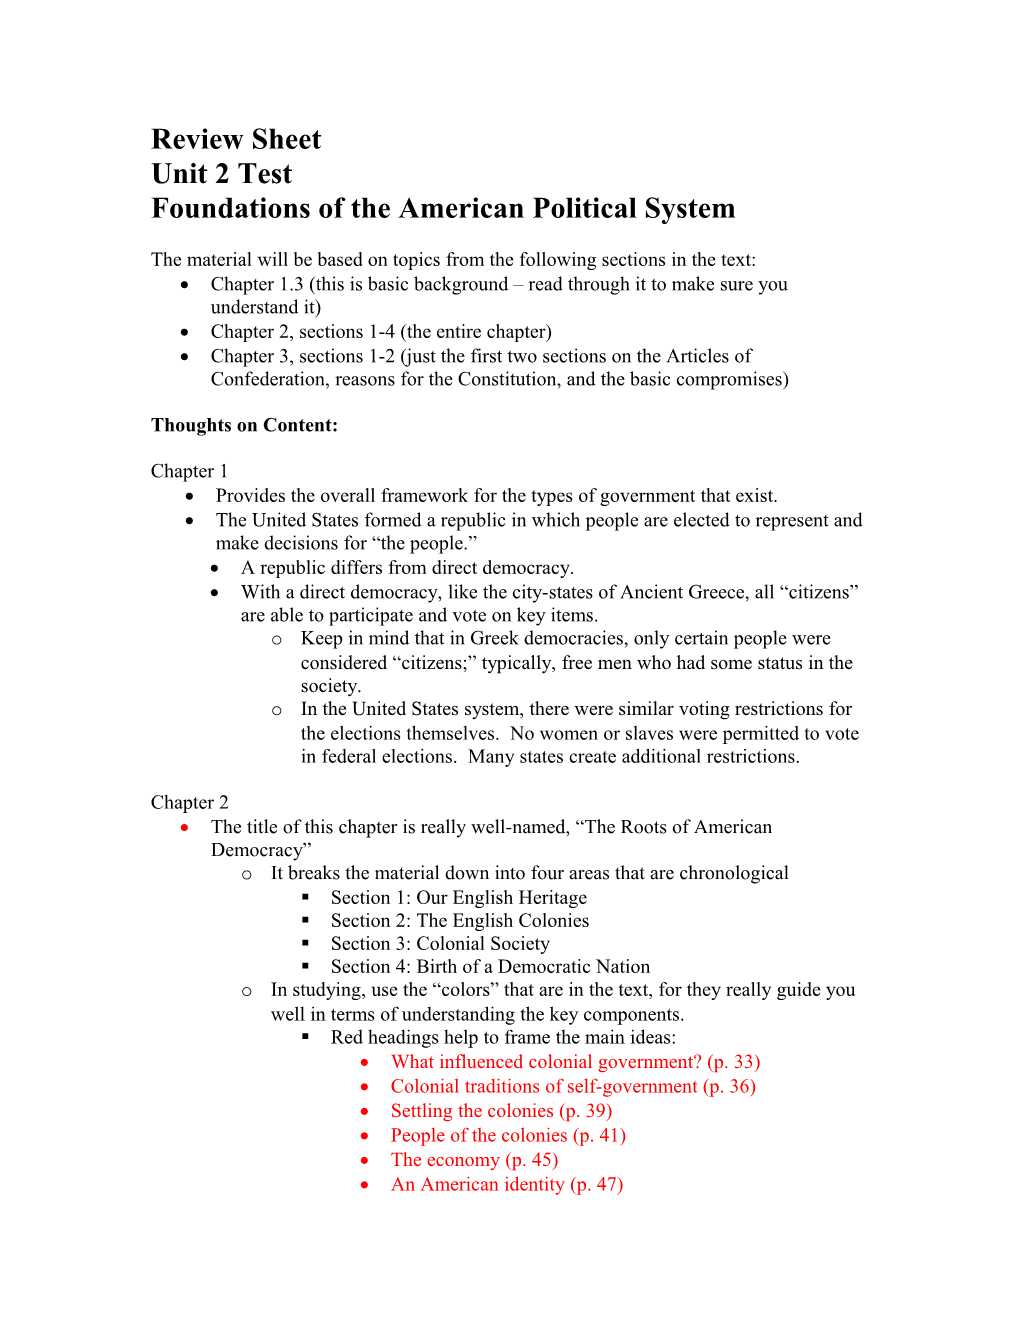 Review Sheet for Unit 2 Test, Foundations of the American Political System